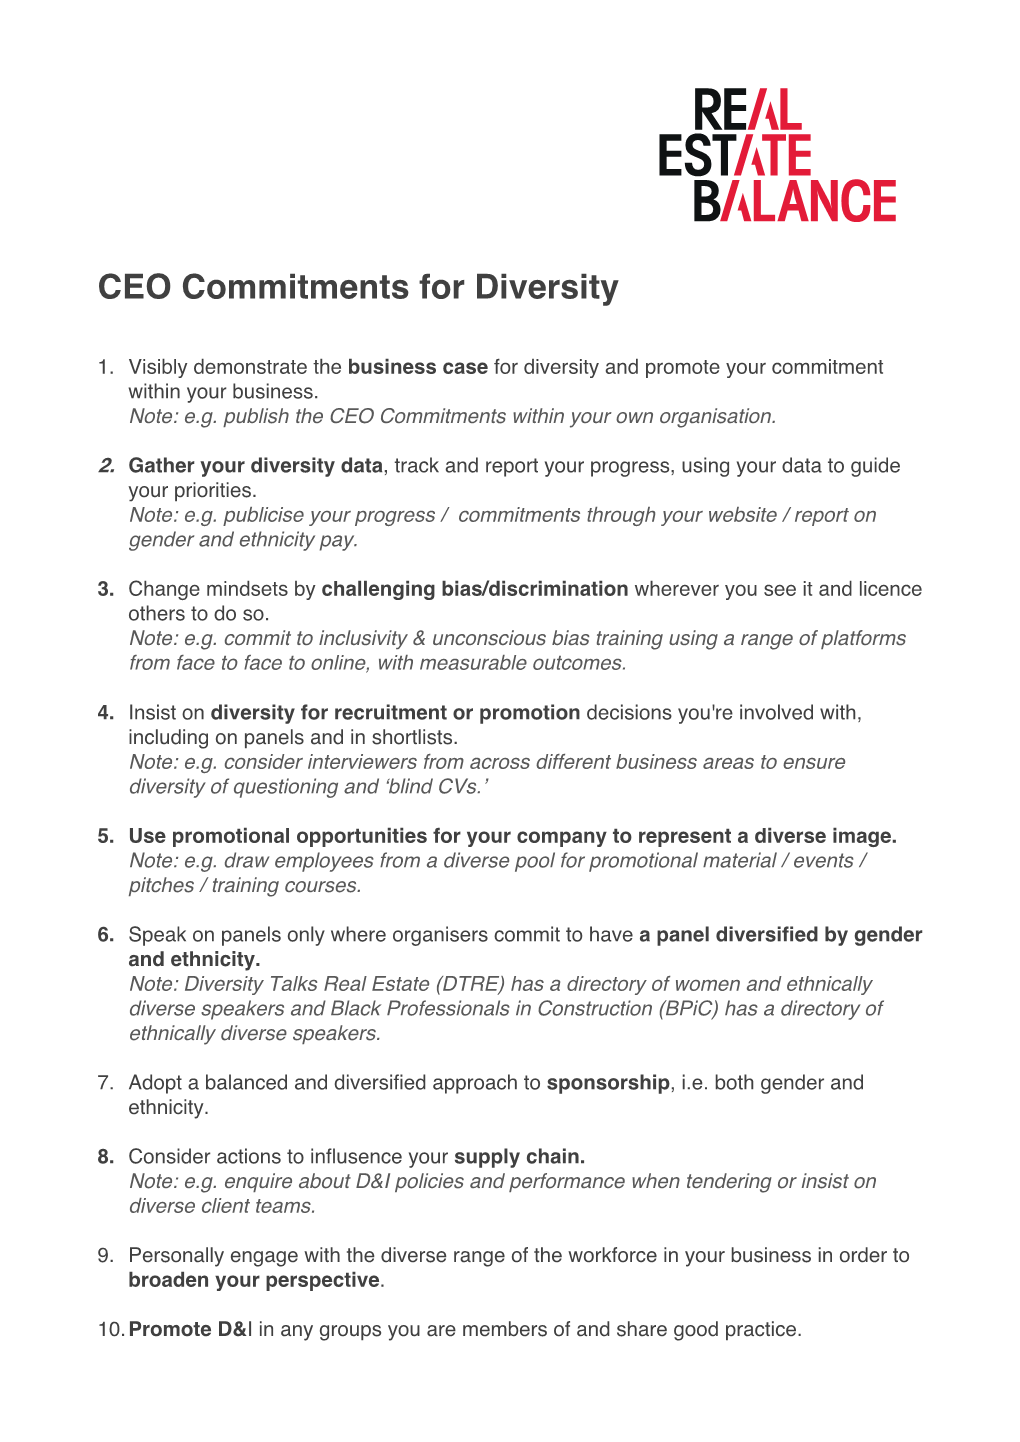 REB CEO Commitments for Diversity August 2021